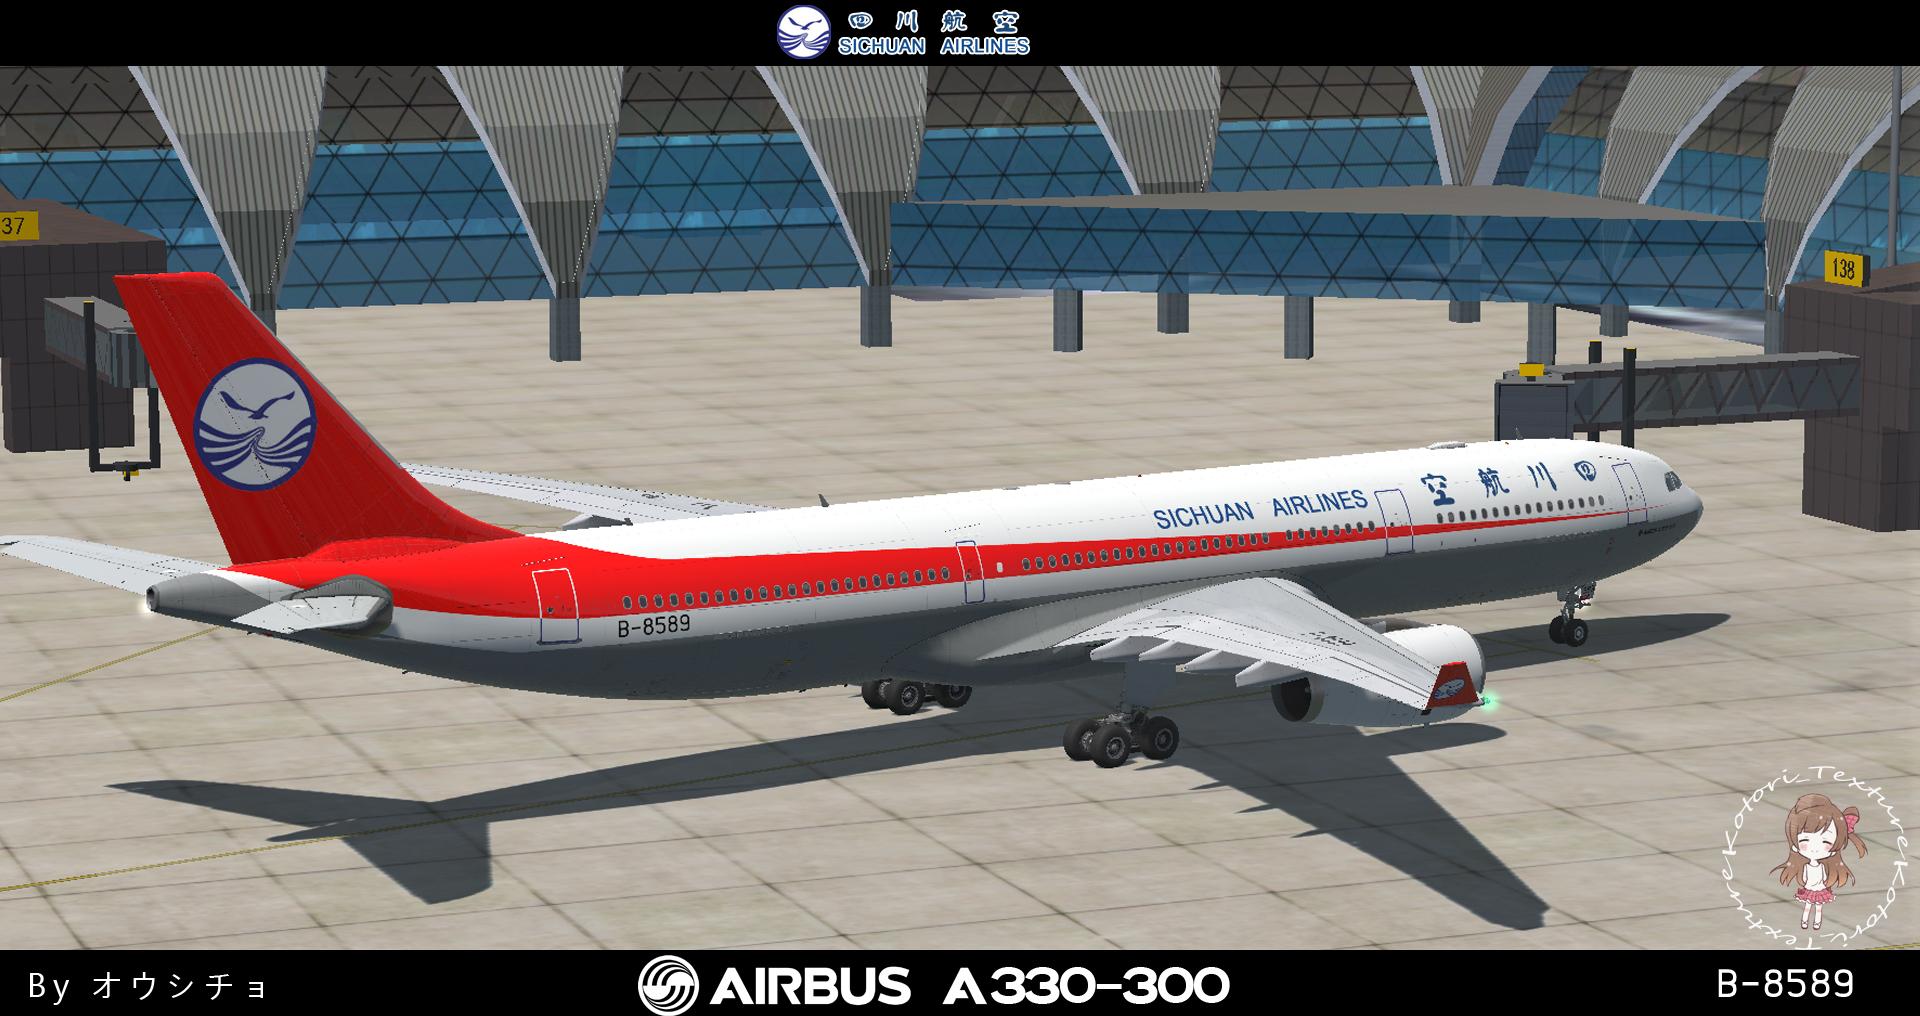 More information about "Aerosoft A330 Sichuan Airlines B-8589"